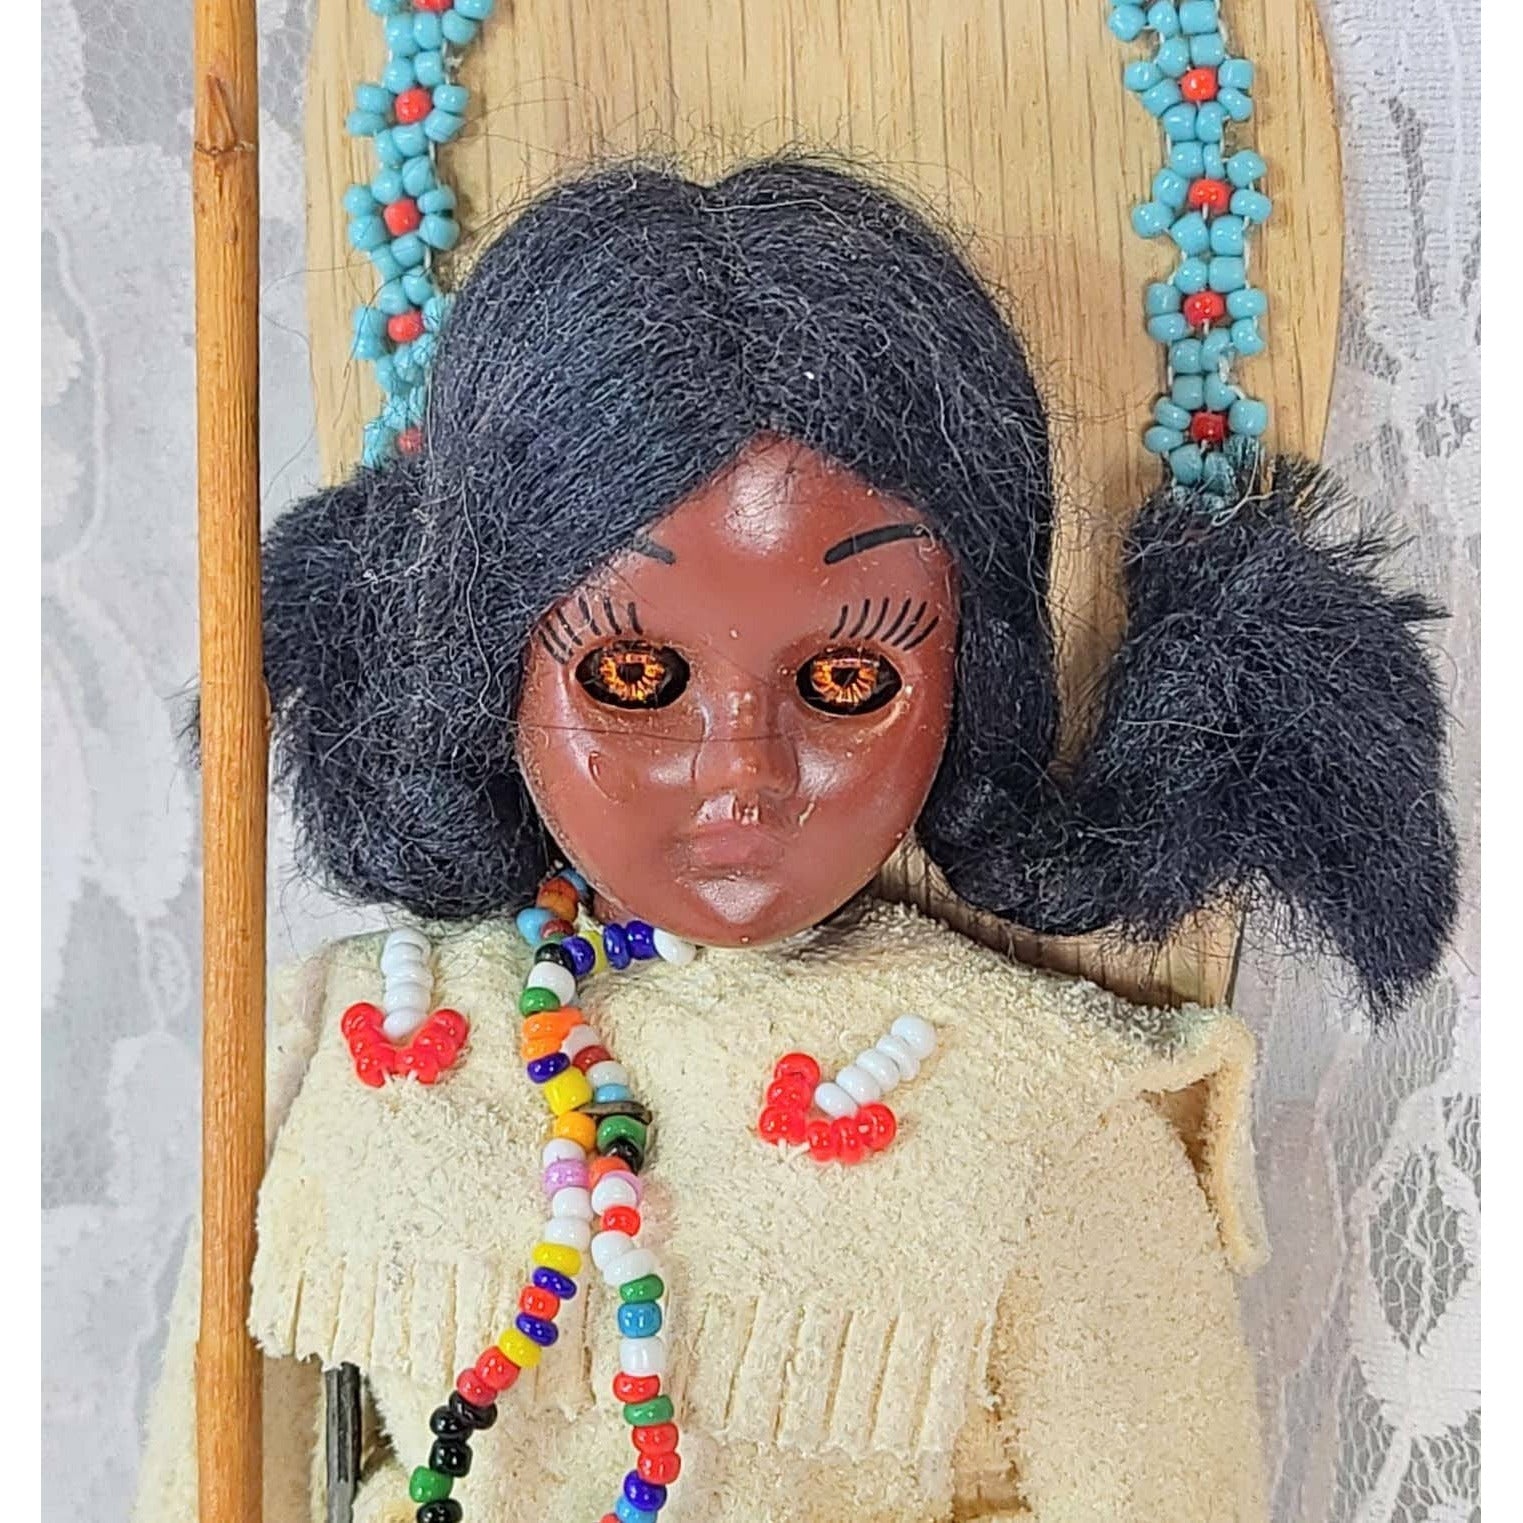 Carlson Dolls 1950s Vintage 8" Doll in Native American Outfit with Papoose ~ Real Leather and Fur, Tagged and Signed by Maker